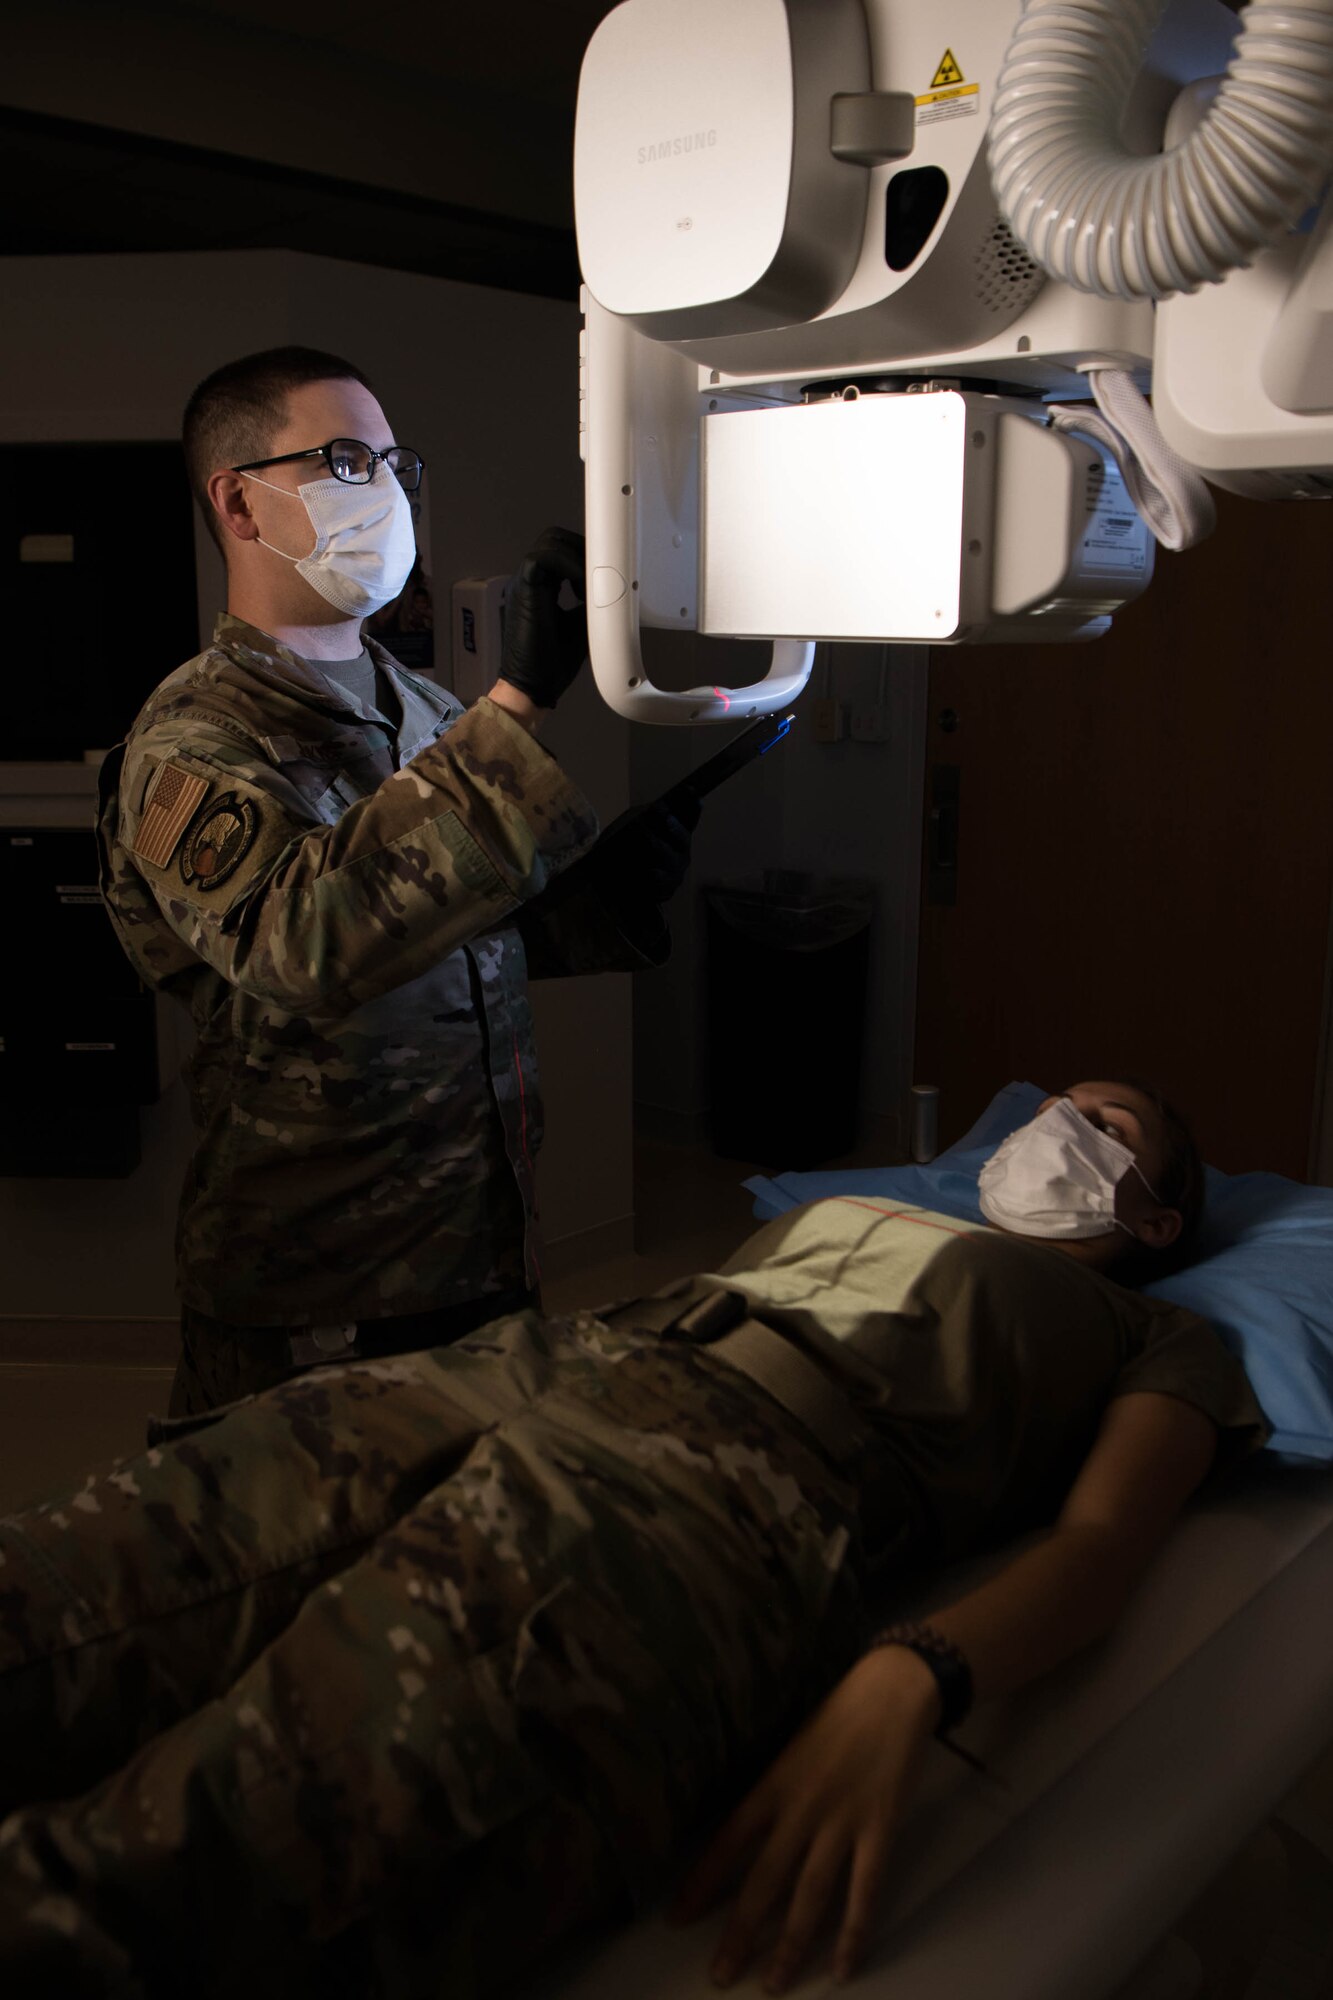 Tech. Sgt. Timothy Jenkins, 436th Medical Support Squadron Diagnostic Imaging section chief, prepares to take a thoracic spine X-ray of Airman 1st Class Brianna Monteiro, 436th MDSS medical laboratory technician, on Dover Air Force Base, Delaware, Aug. 13, 2021. Radiology Airmen assigned to Dover AFB serve a three-year controlled tour to enable full support of the Armed Forces Medical Examiner System mission. (U.S. Air Force photo by Mauricio Campino)